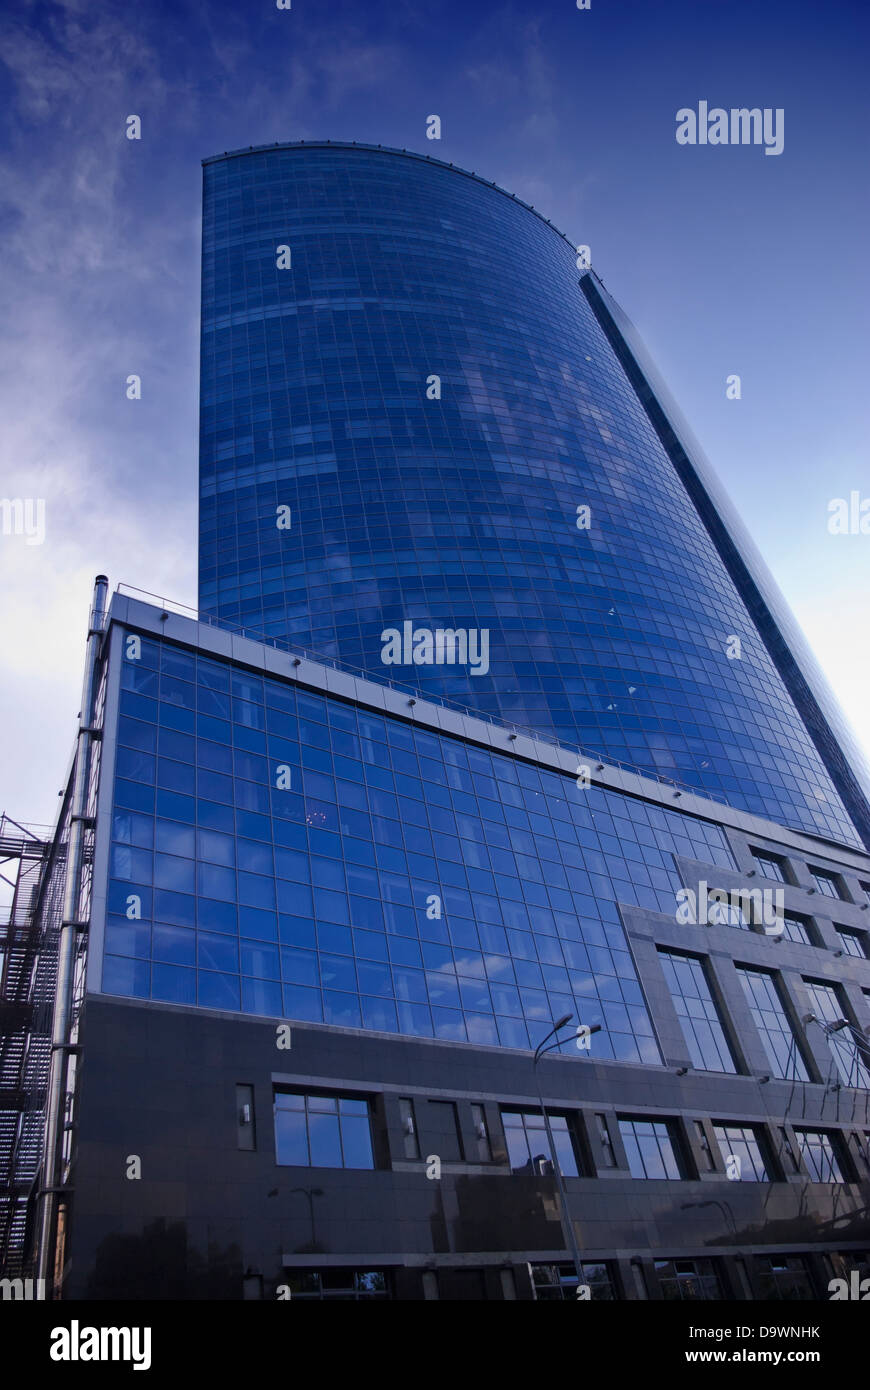 Exterior of the building in the city on a background of blue sky Stock Photo